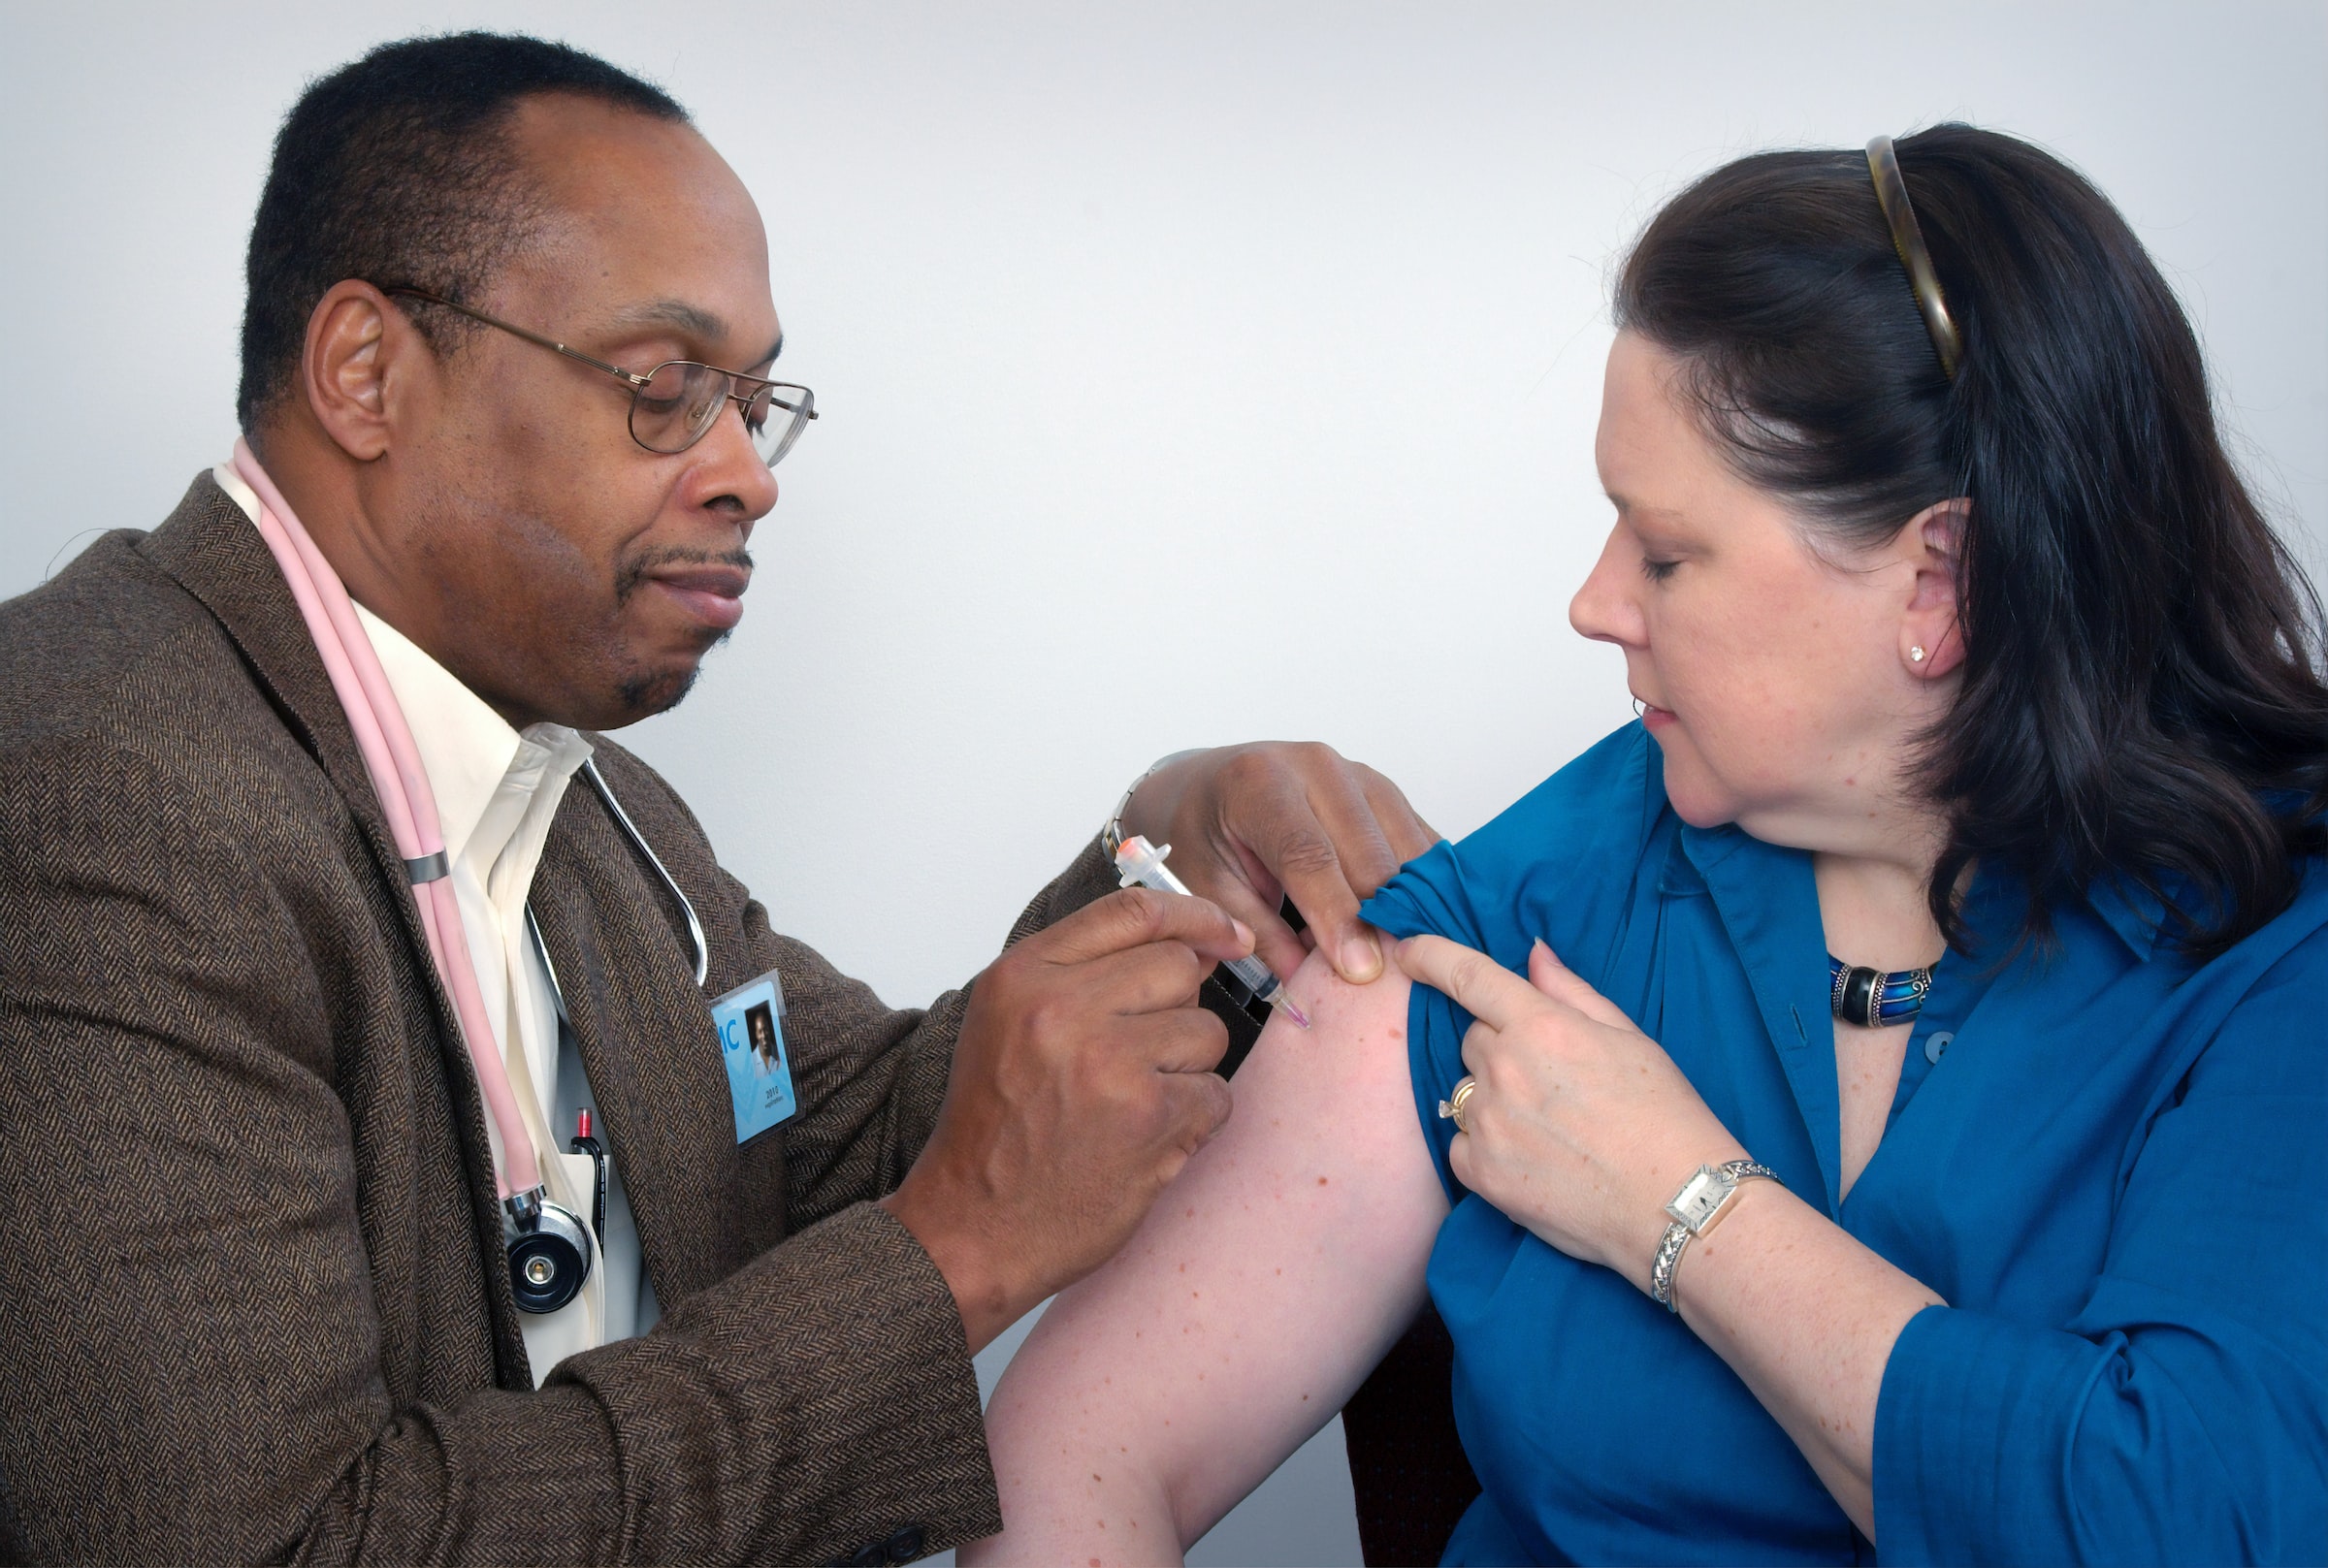 Doctor vaccinating person in right arm